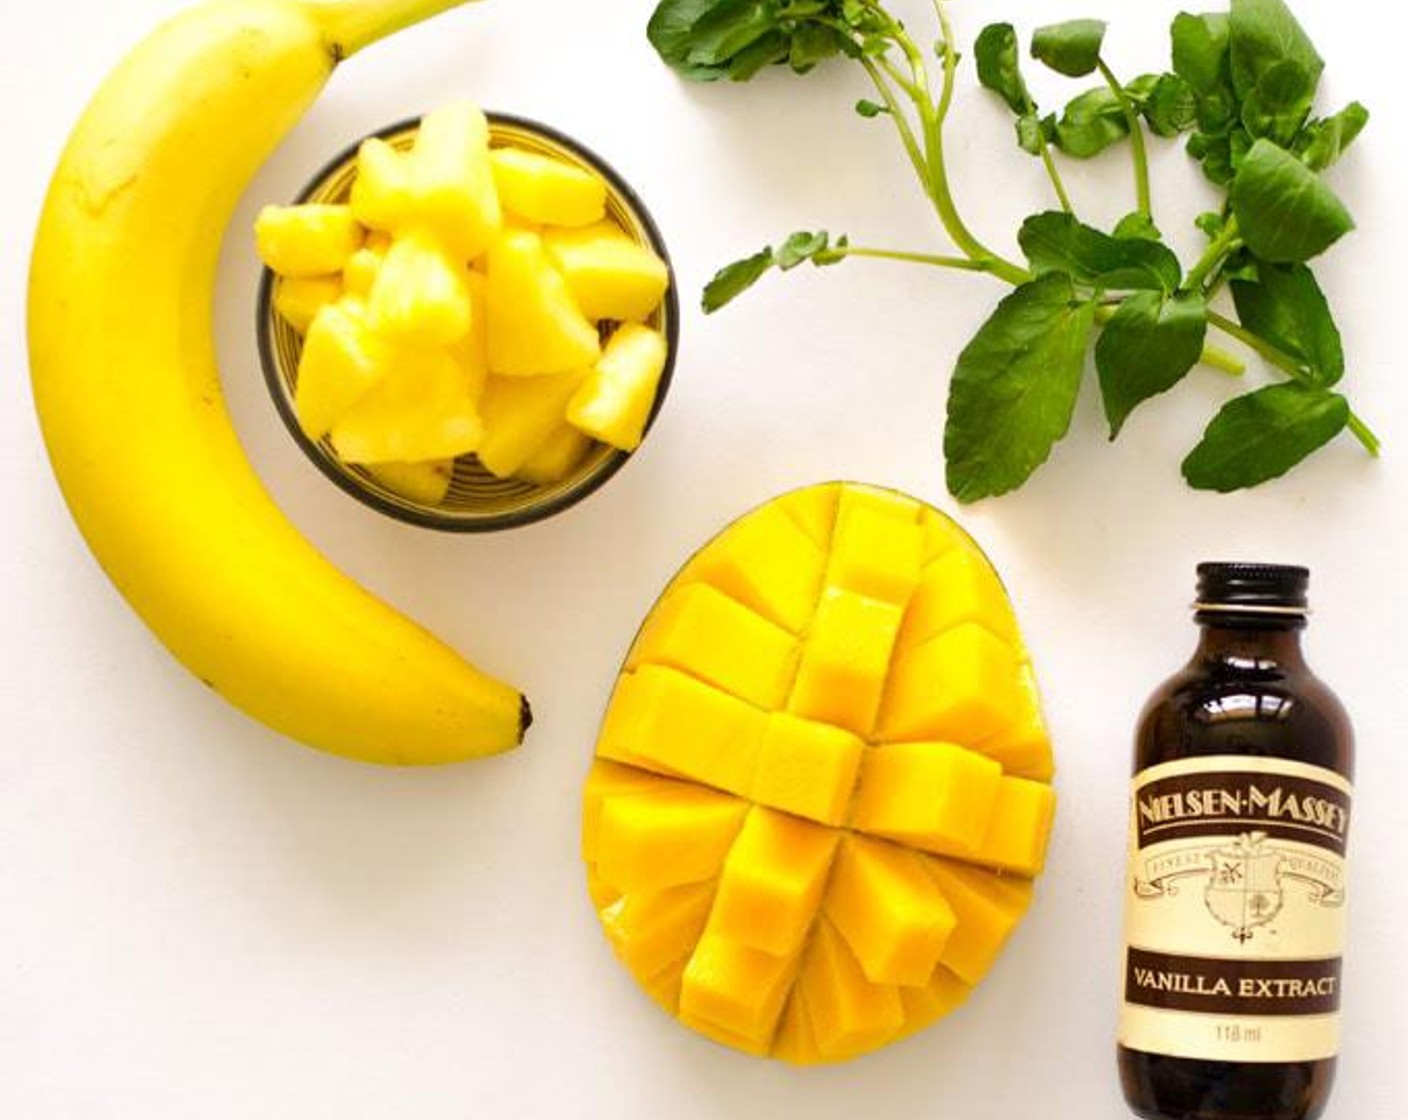 step 1 Blend Watercress (1 cup) and Oranges (3) until smooth, then add the rest of the ingredients. The rest of the ingredients include Pineapple (1/2 cup), Mango (1/2 cup), Banana (1) and  Vanilla Extract (1 tsp).